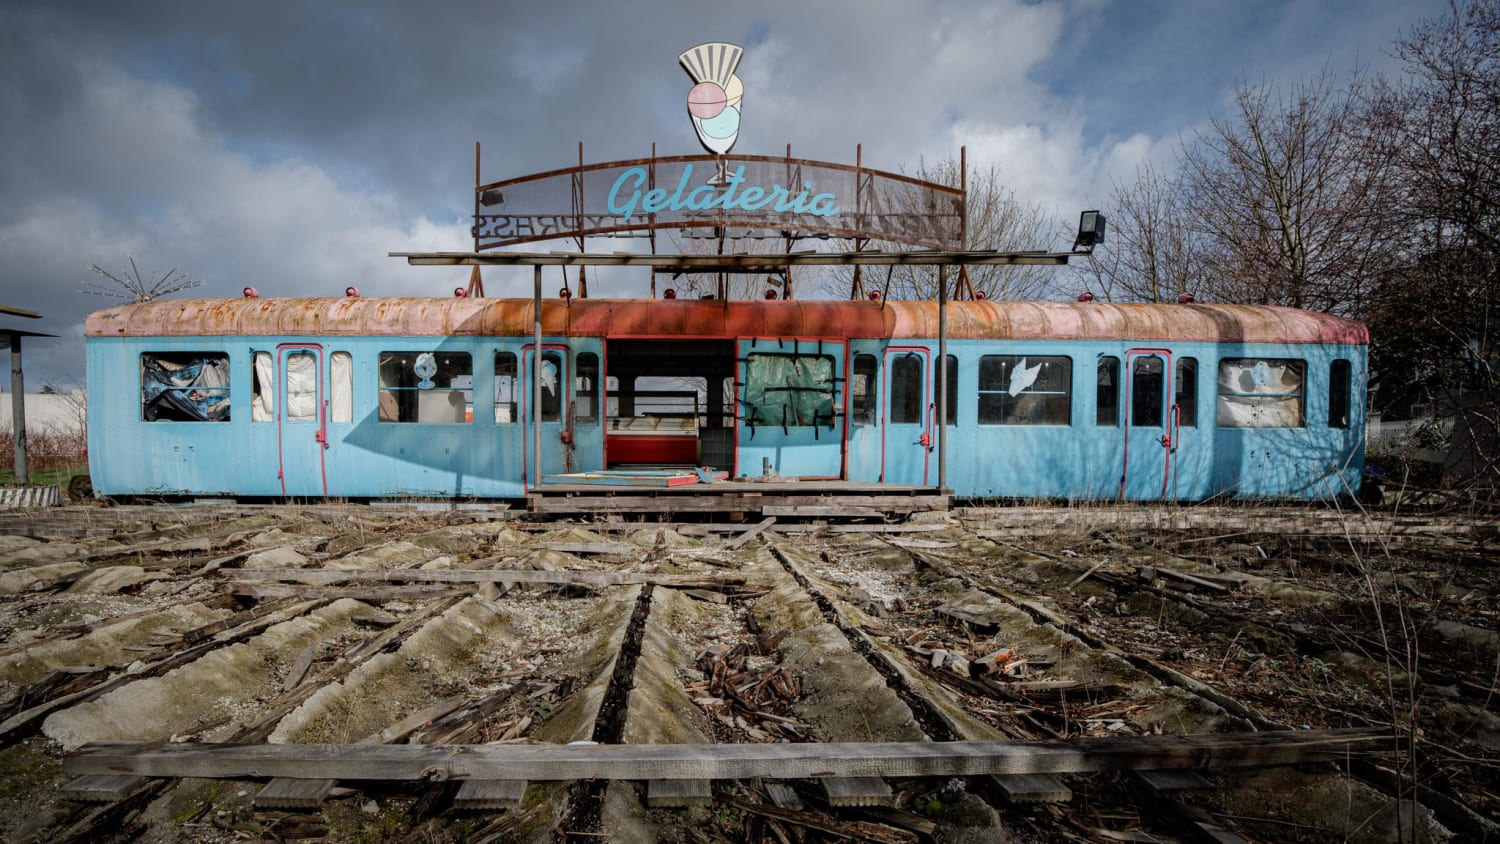 Old train car ice cream diner left on the side of the road to rot in south Belgium [oc]